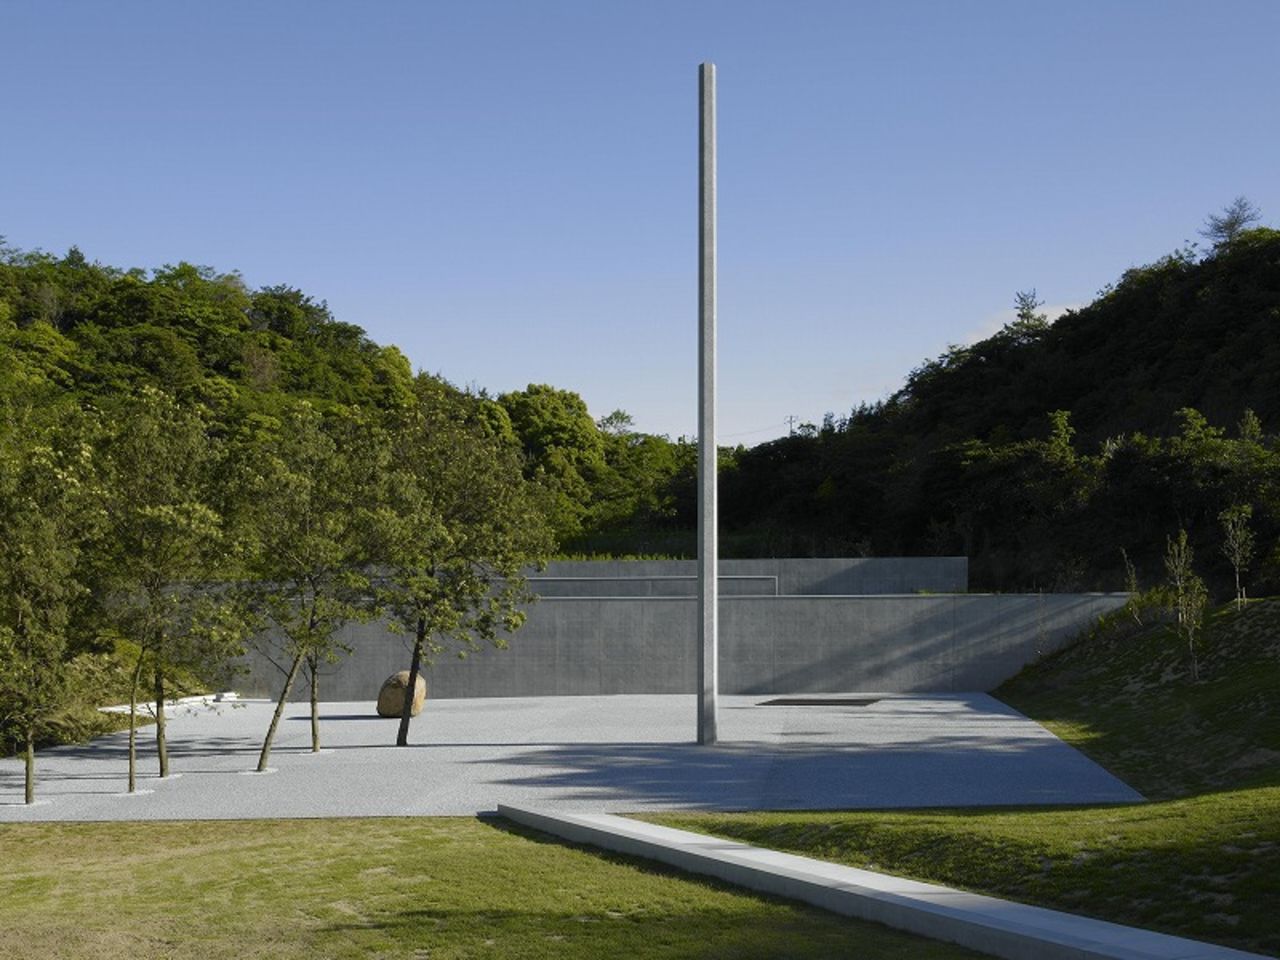 Among delights of Naoshima are hidden venues that appear unexpectedly. The Lee Ufan Museum, yet another beautifully designed Tadao Ando structure, is almost entirely out of sight behind a nondescript wall and built into the earth. 